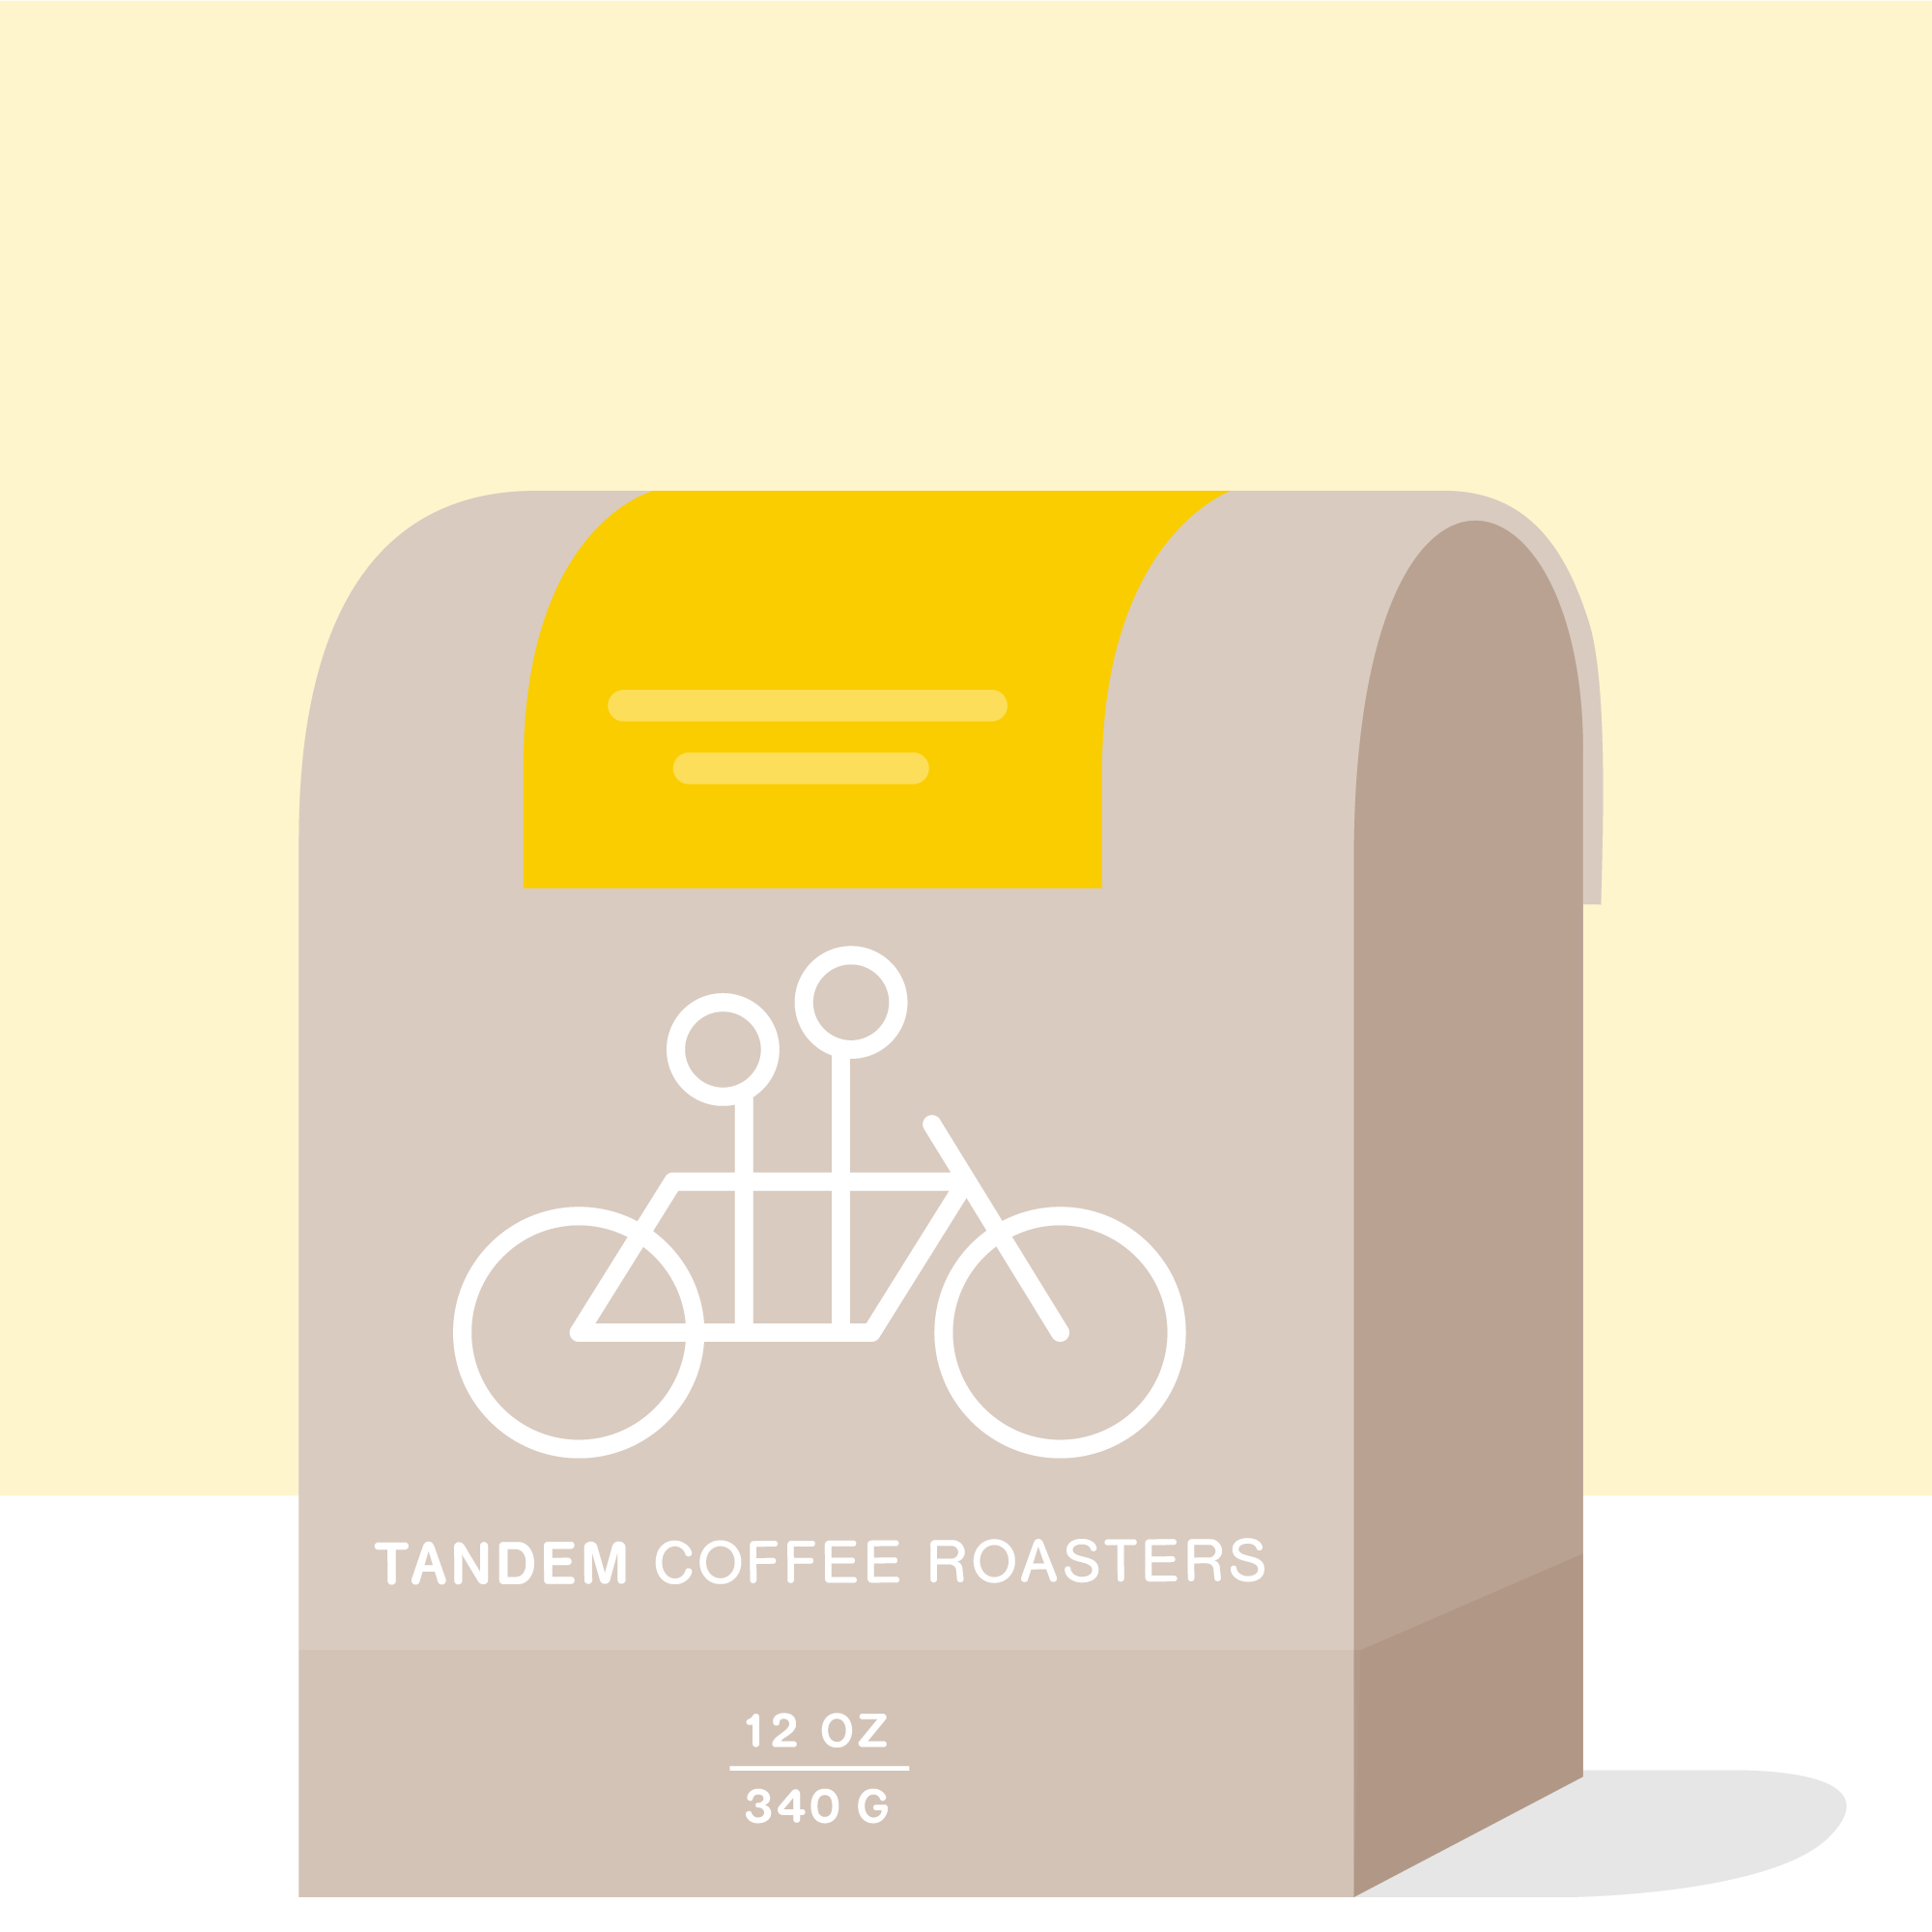 A graphic of a gray coffee bag from Tandem Coffee Roasters, featuring a white tandem bicycle logo. The bag sits against a yellow background and is labeled "12 oz 340 g Ratnagiri - India".